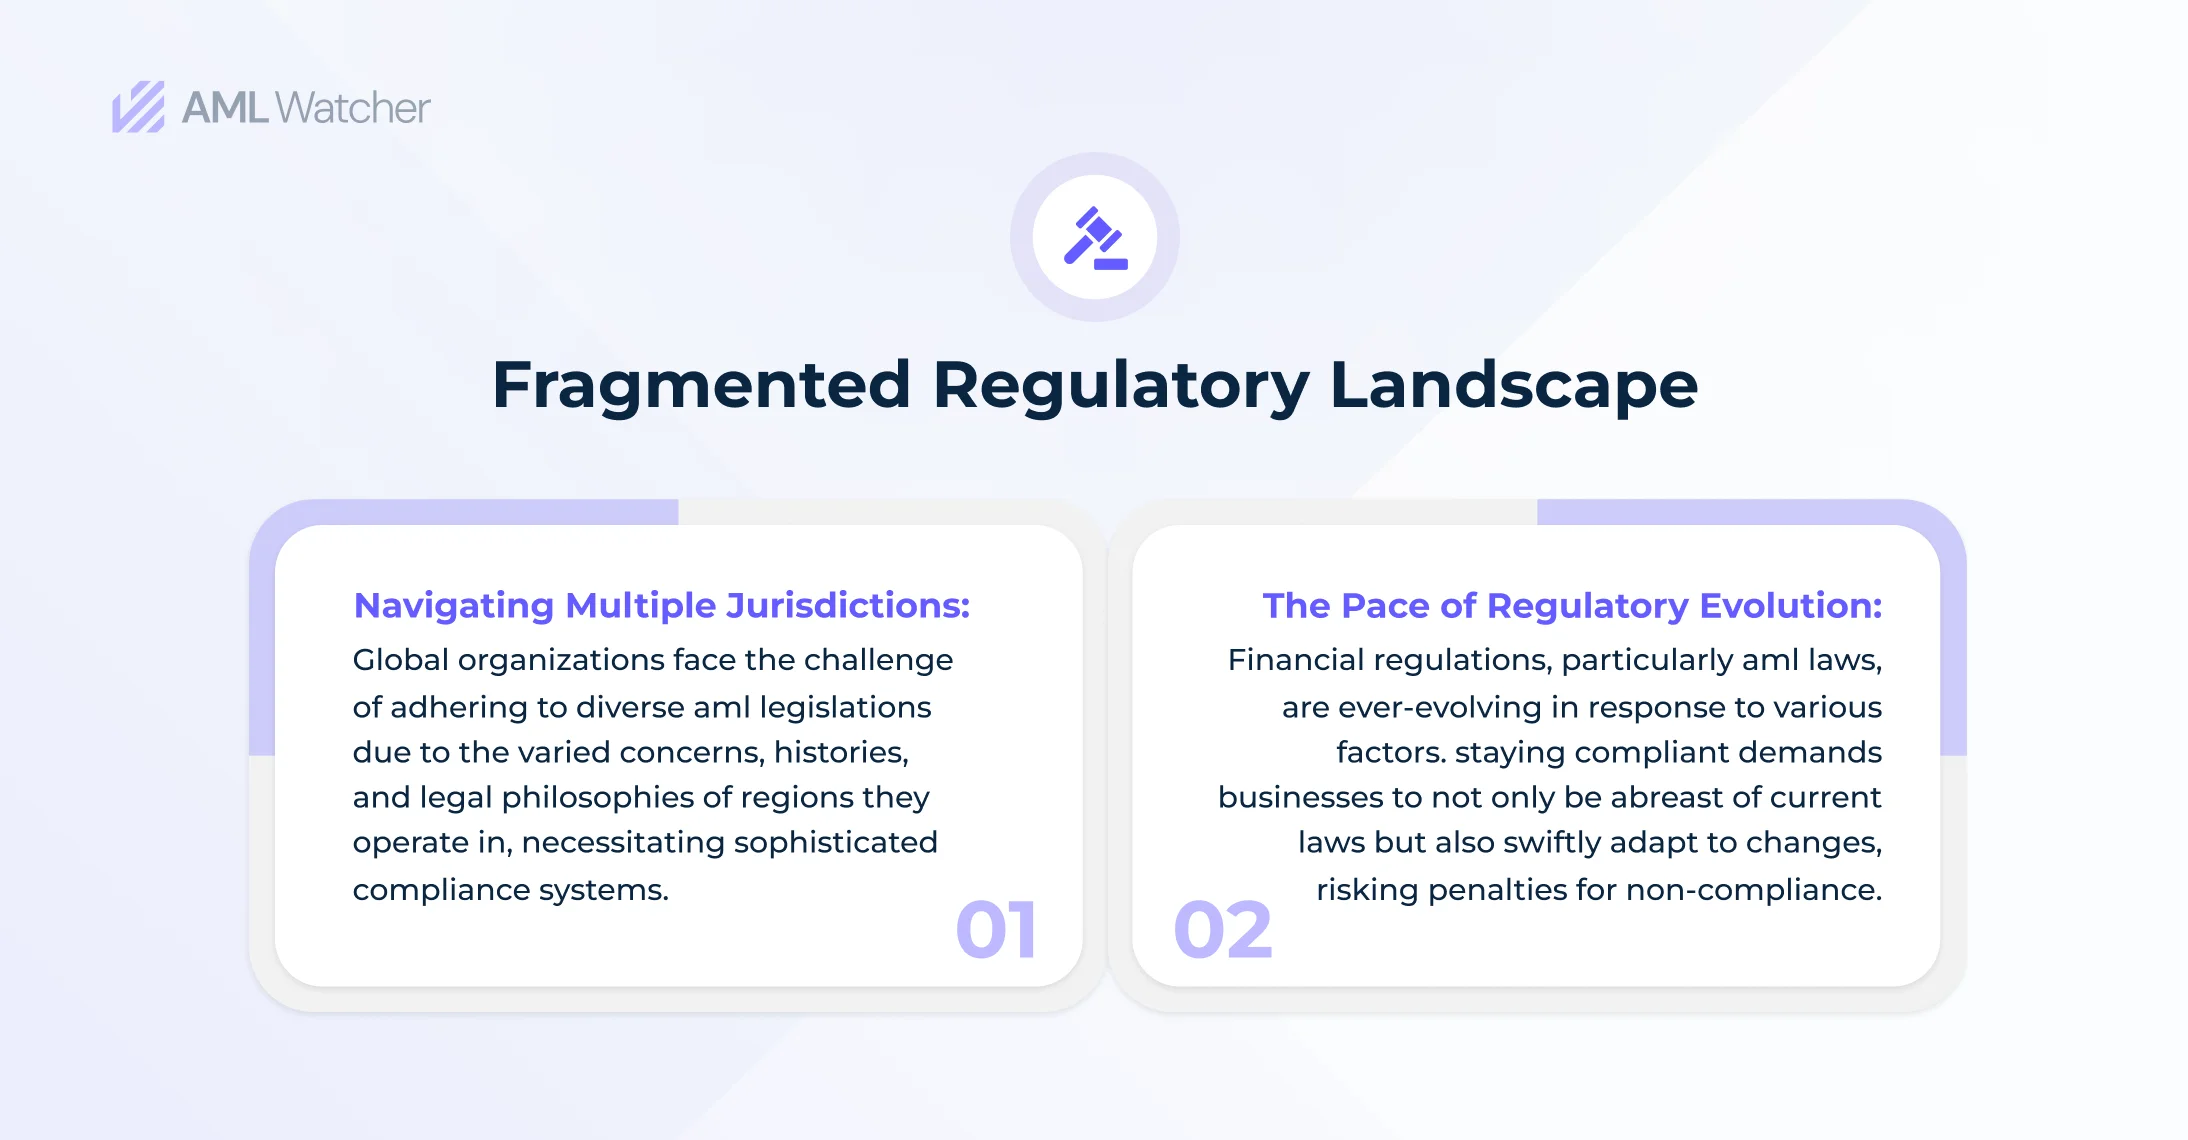 Fragmented Regulatory Landscape: Firms grapple with varied AML laws across jurisdictions & fast-evolving financial regulations